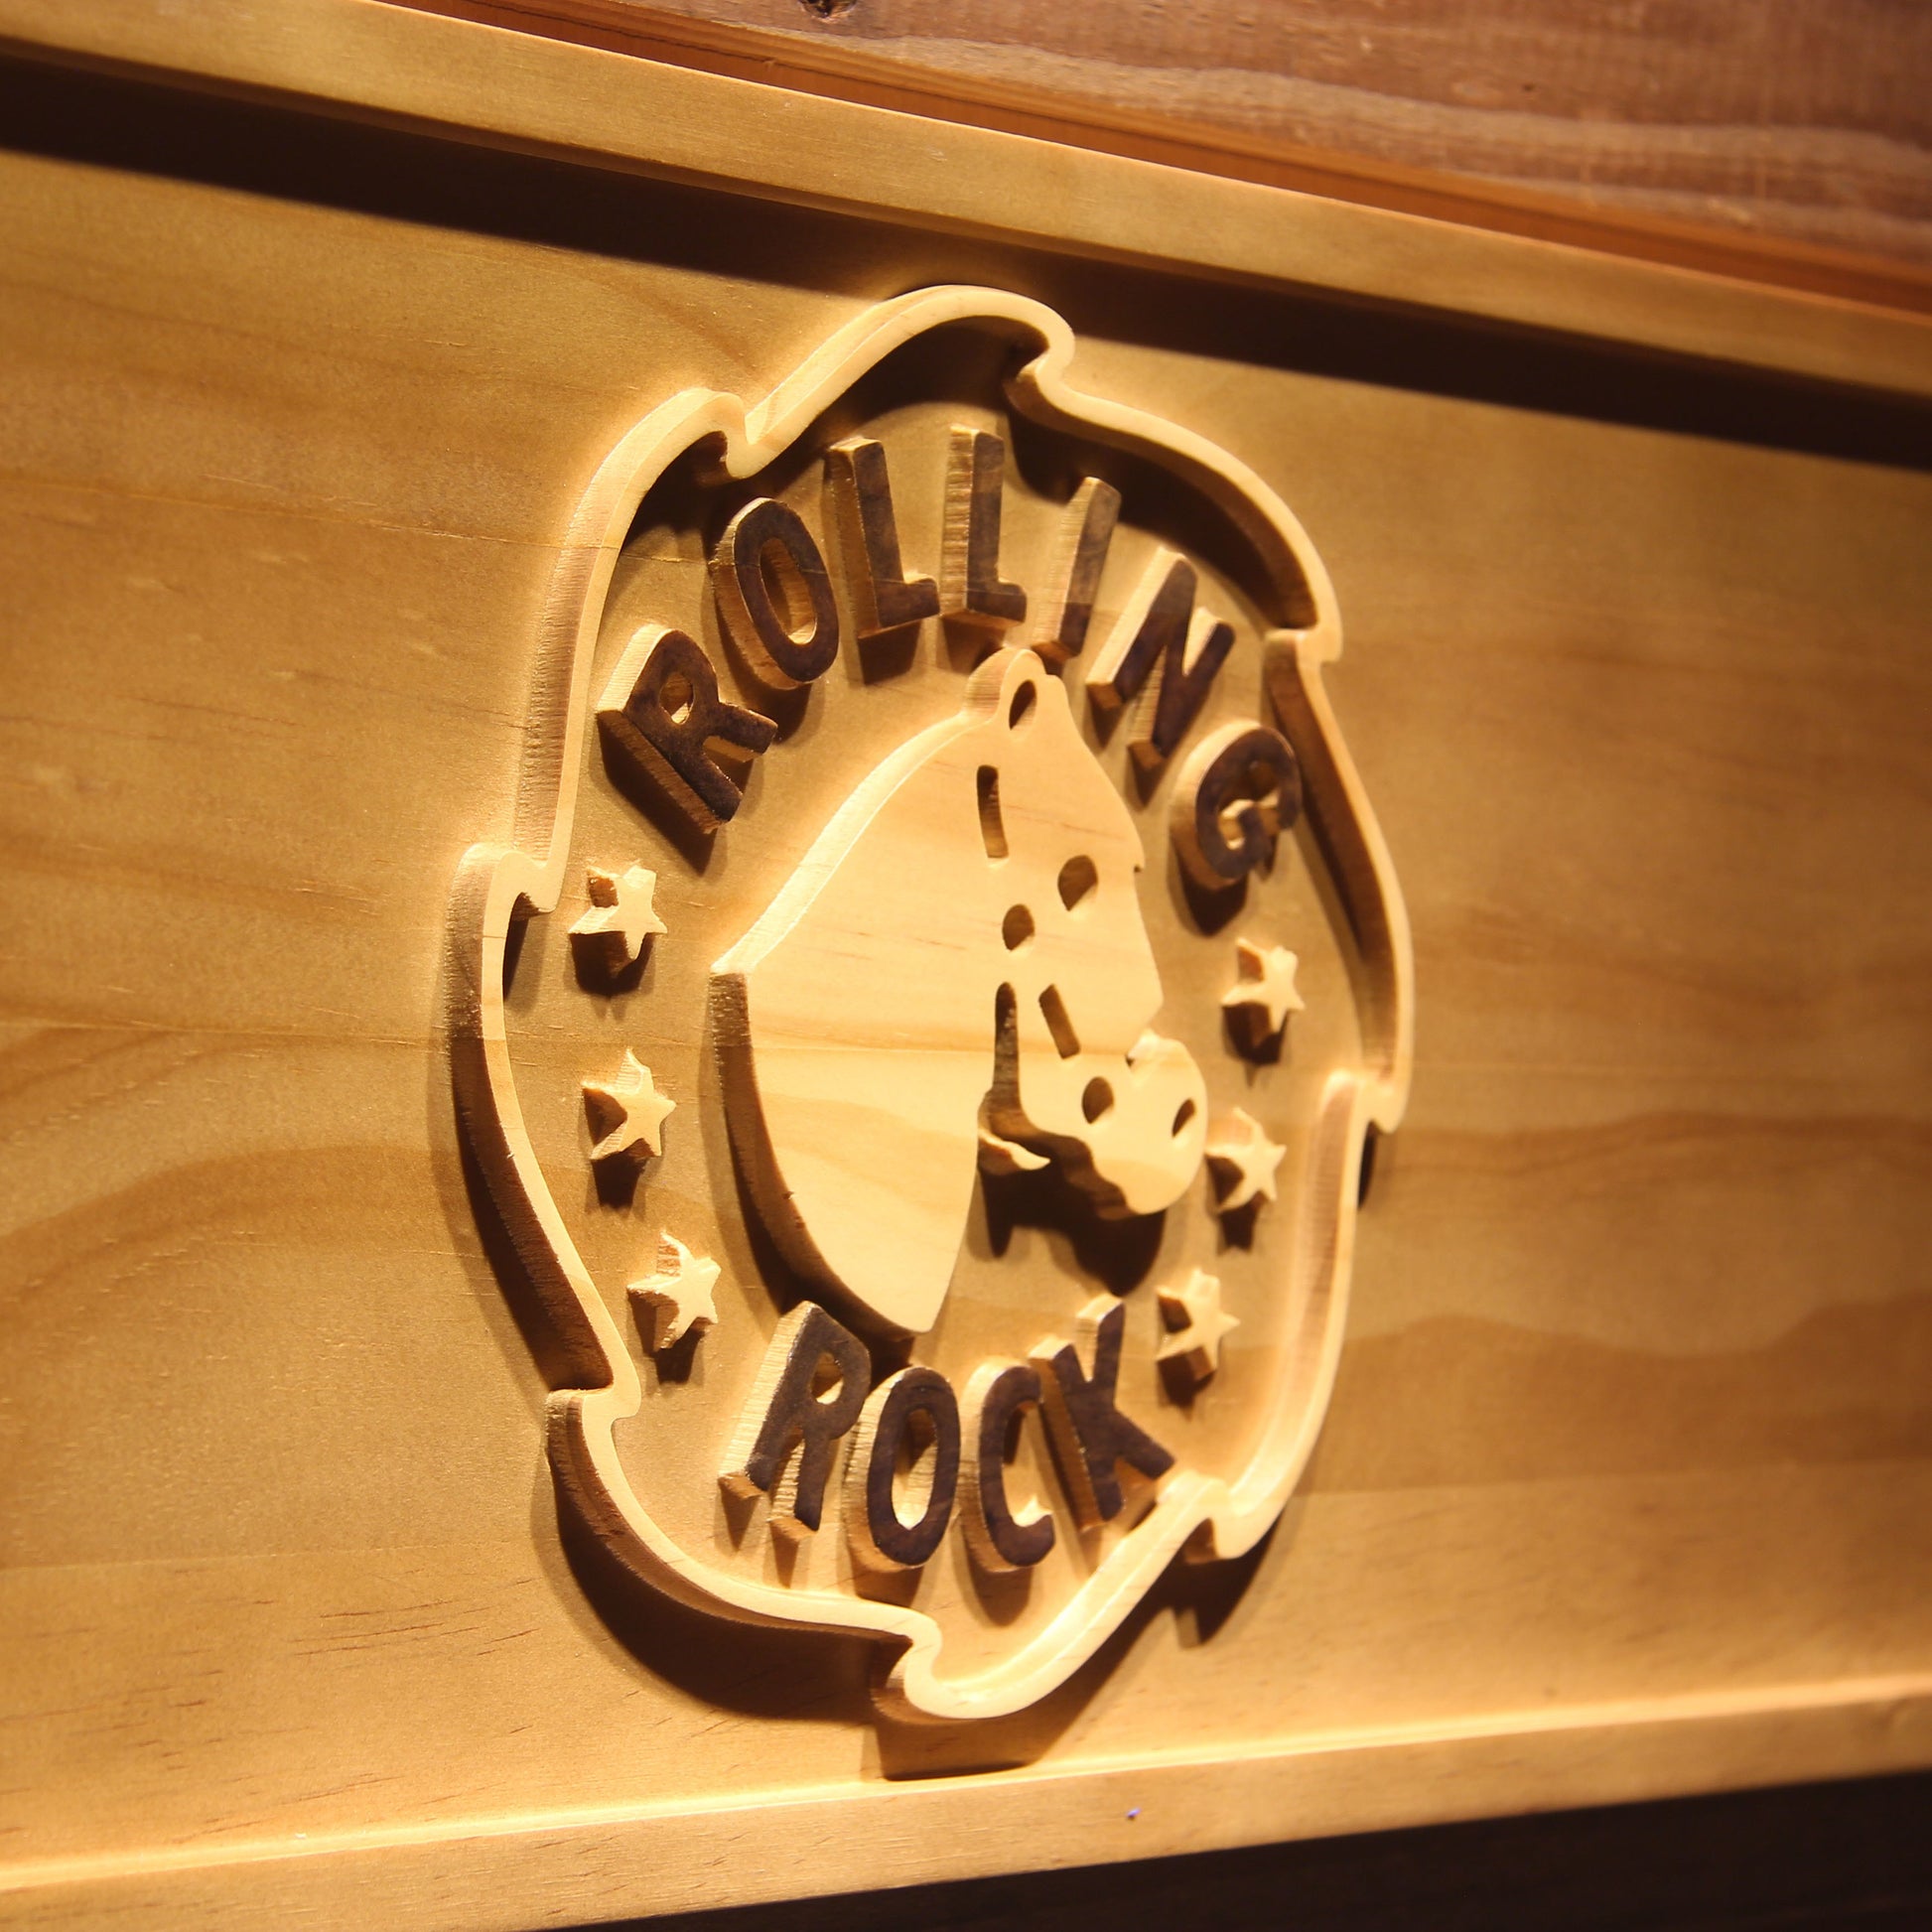 Rolling Rock  3D Wooden Bar Signs by Woody Signs Co. - Handmade Crafted Unique Wooden Creative